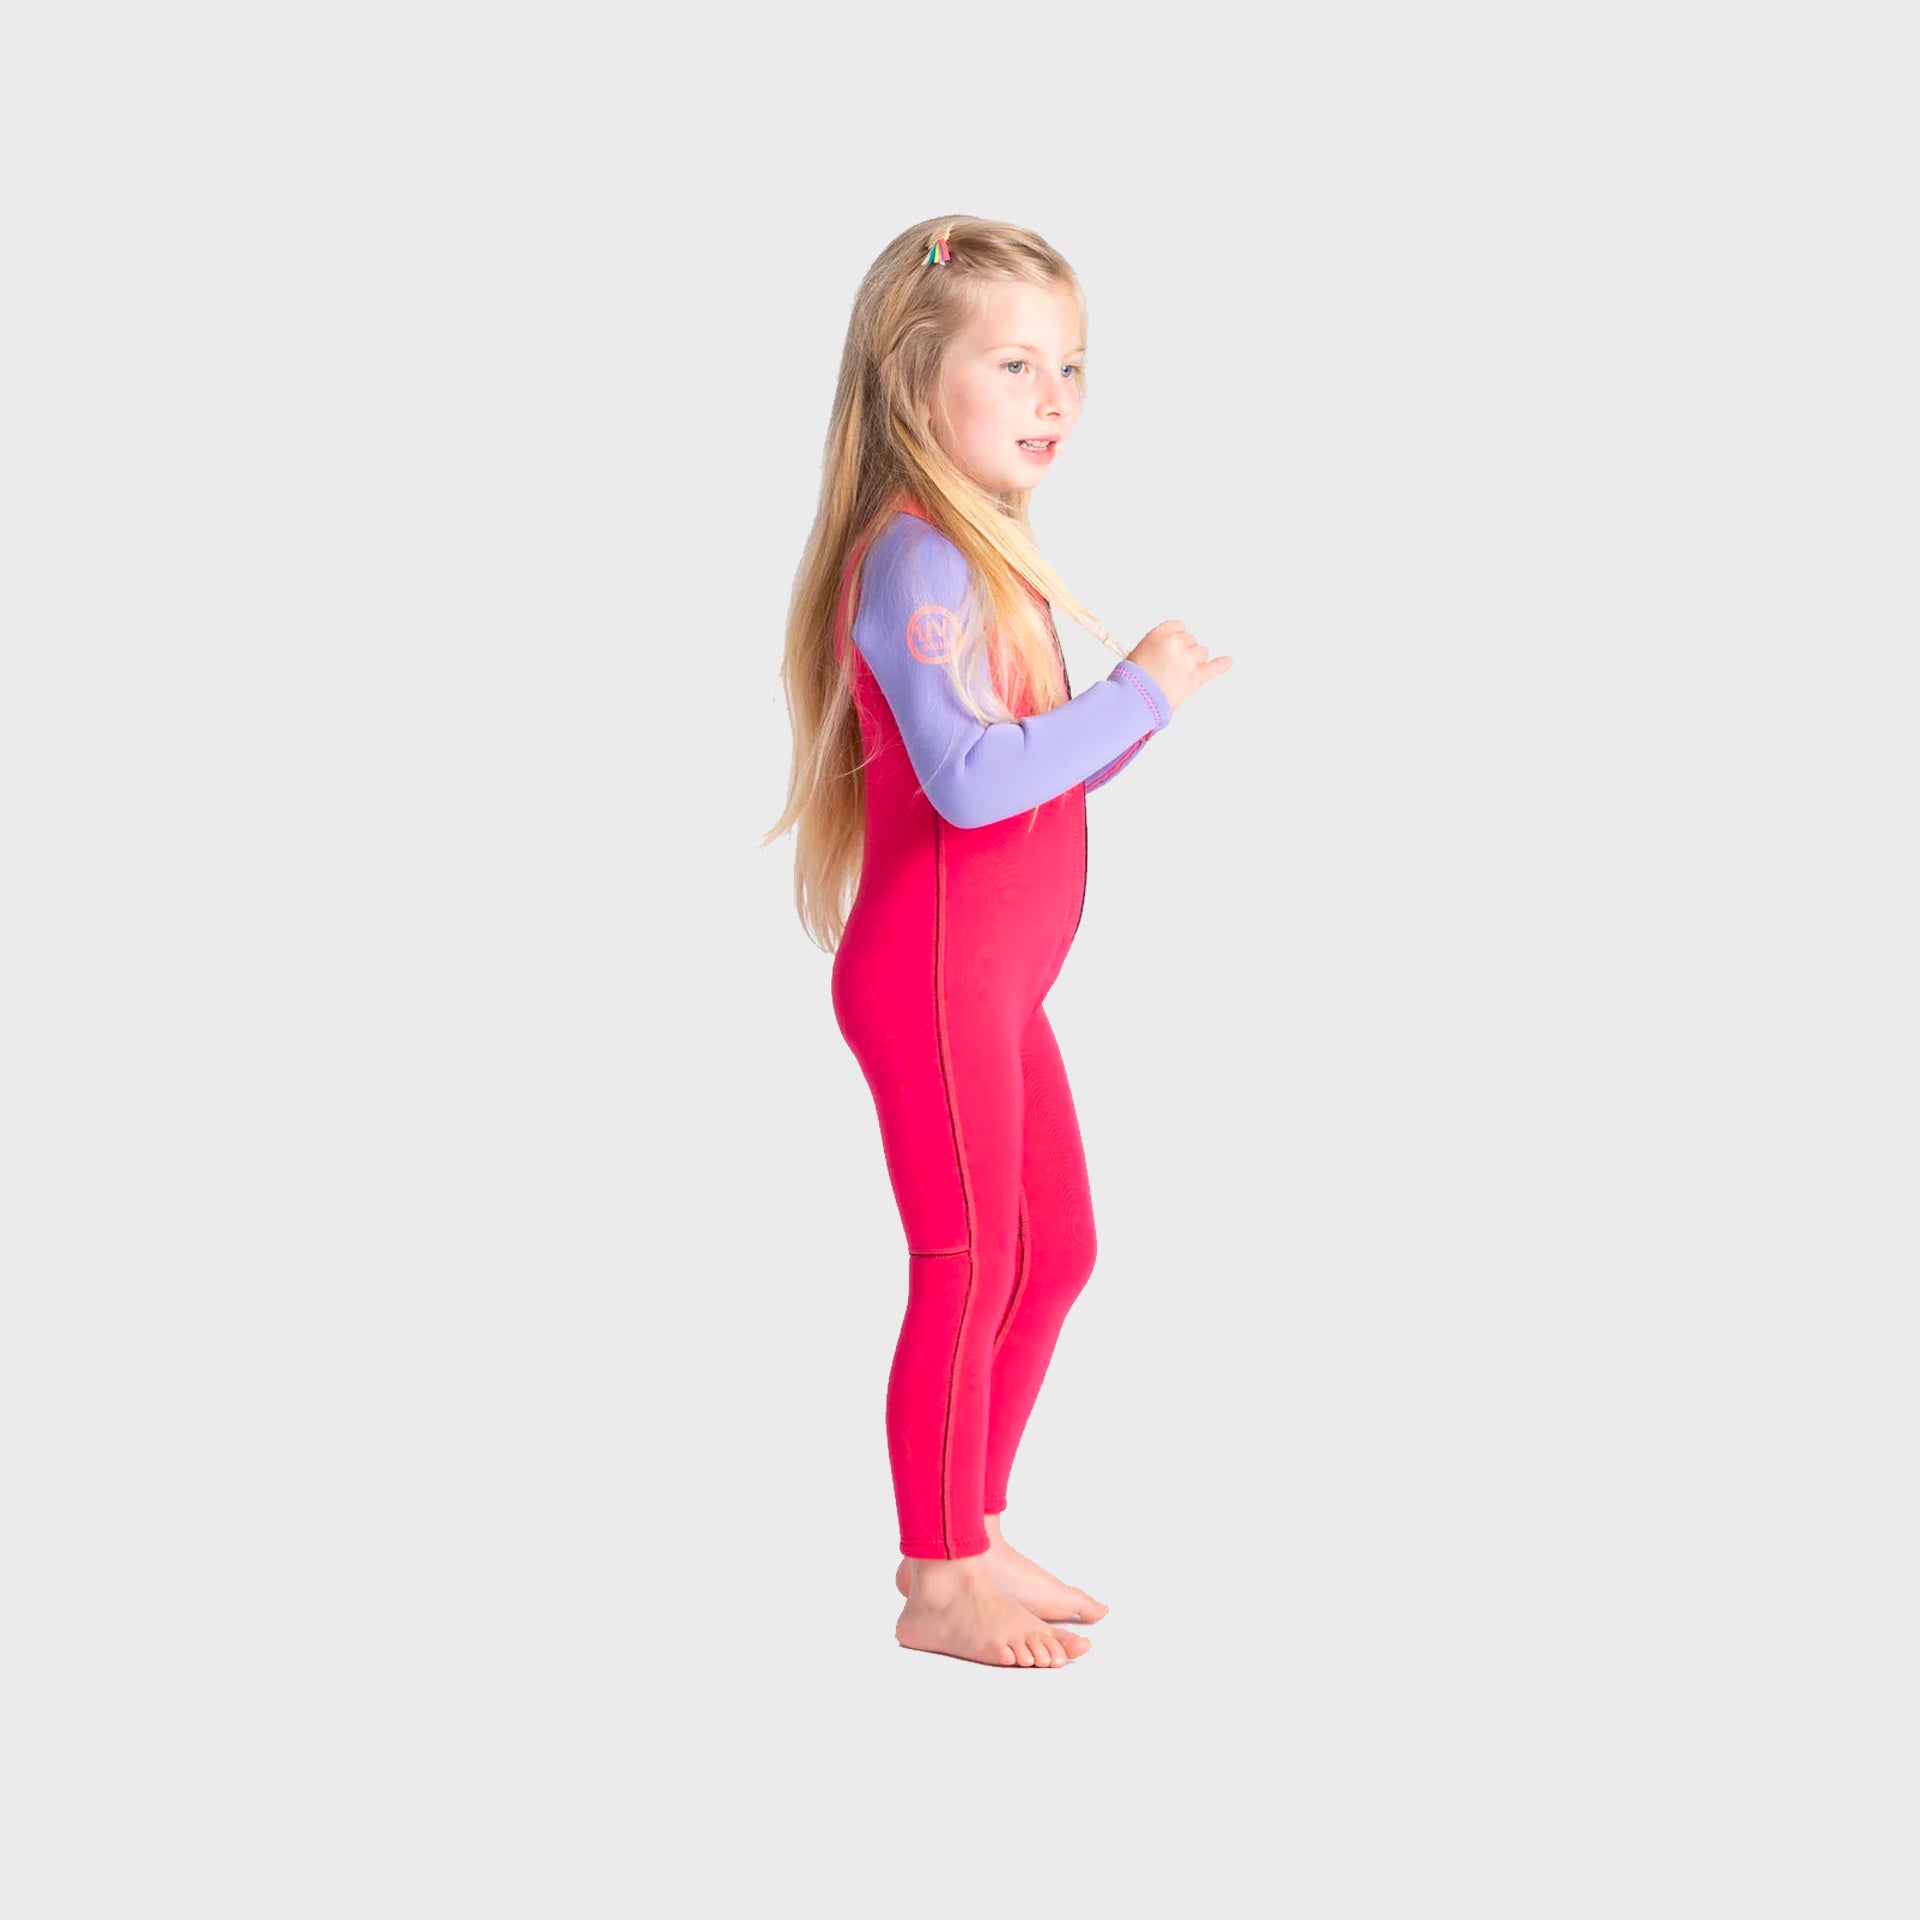 C-Skins C-KID Baby Steamer Wetsuit - Coral/Lilac/Bright Coral - ManGo Surfing